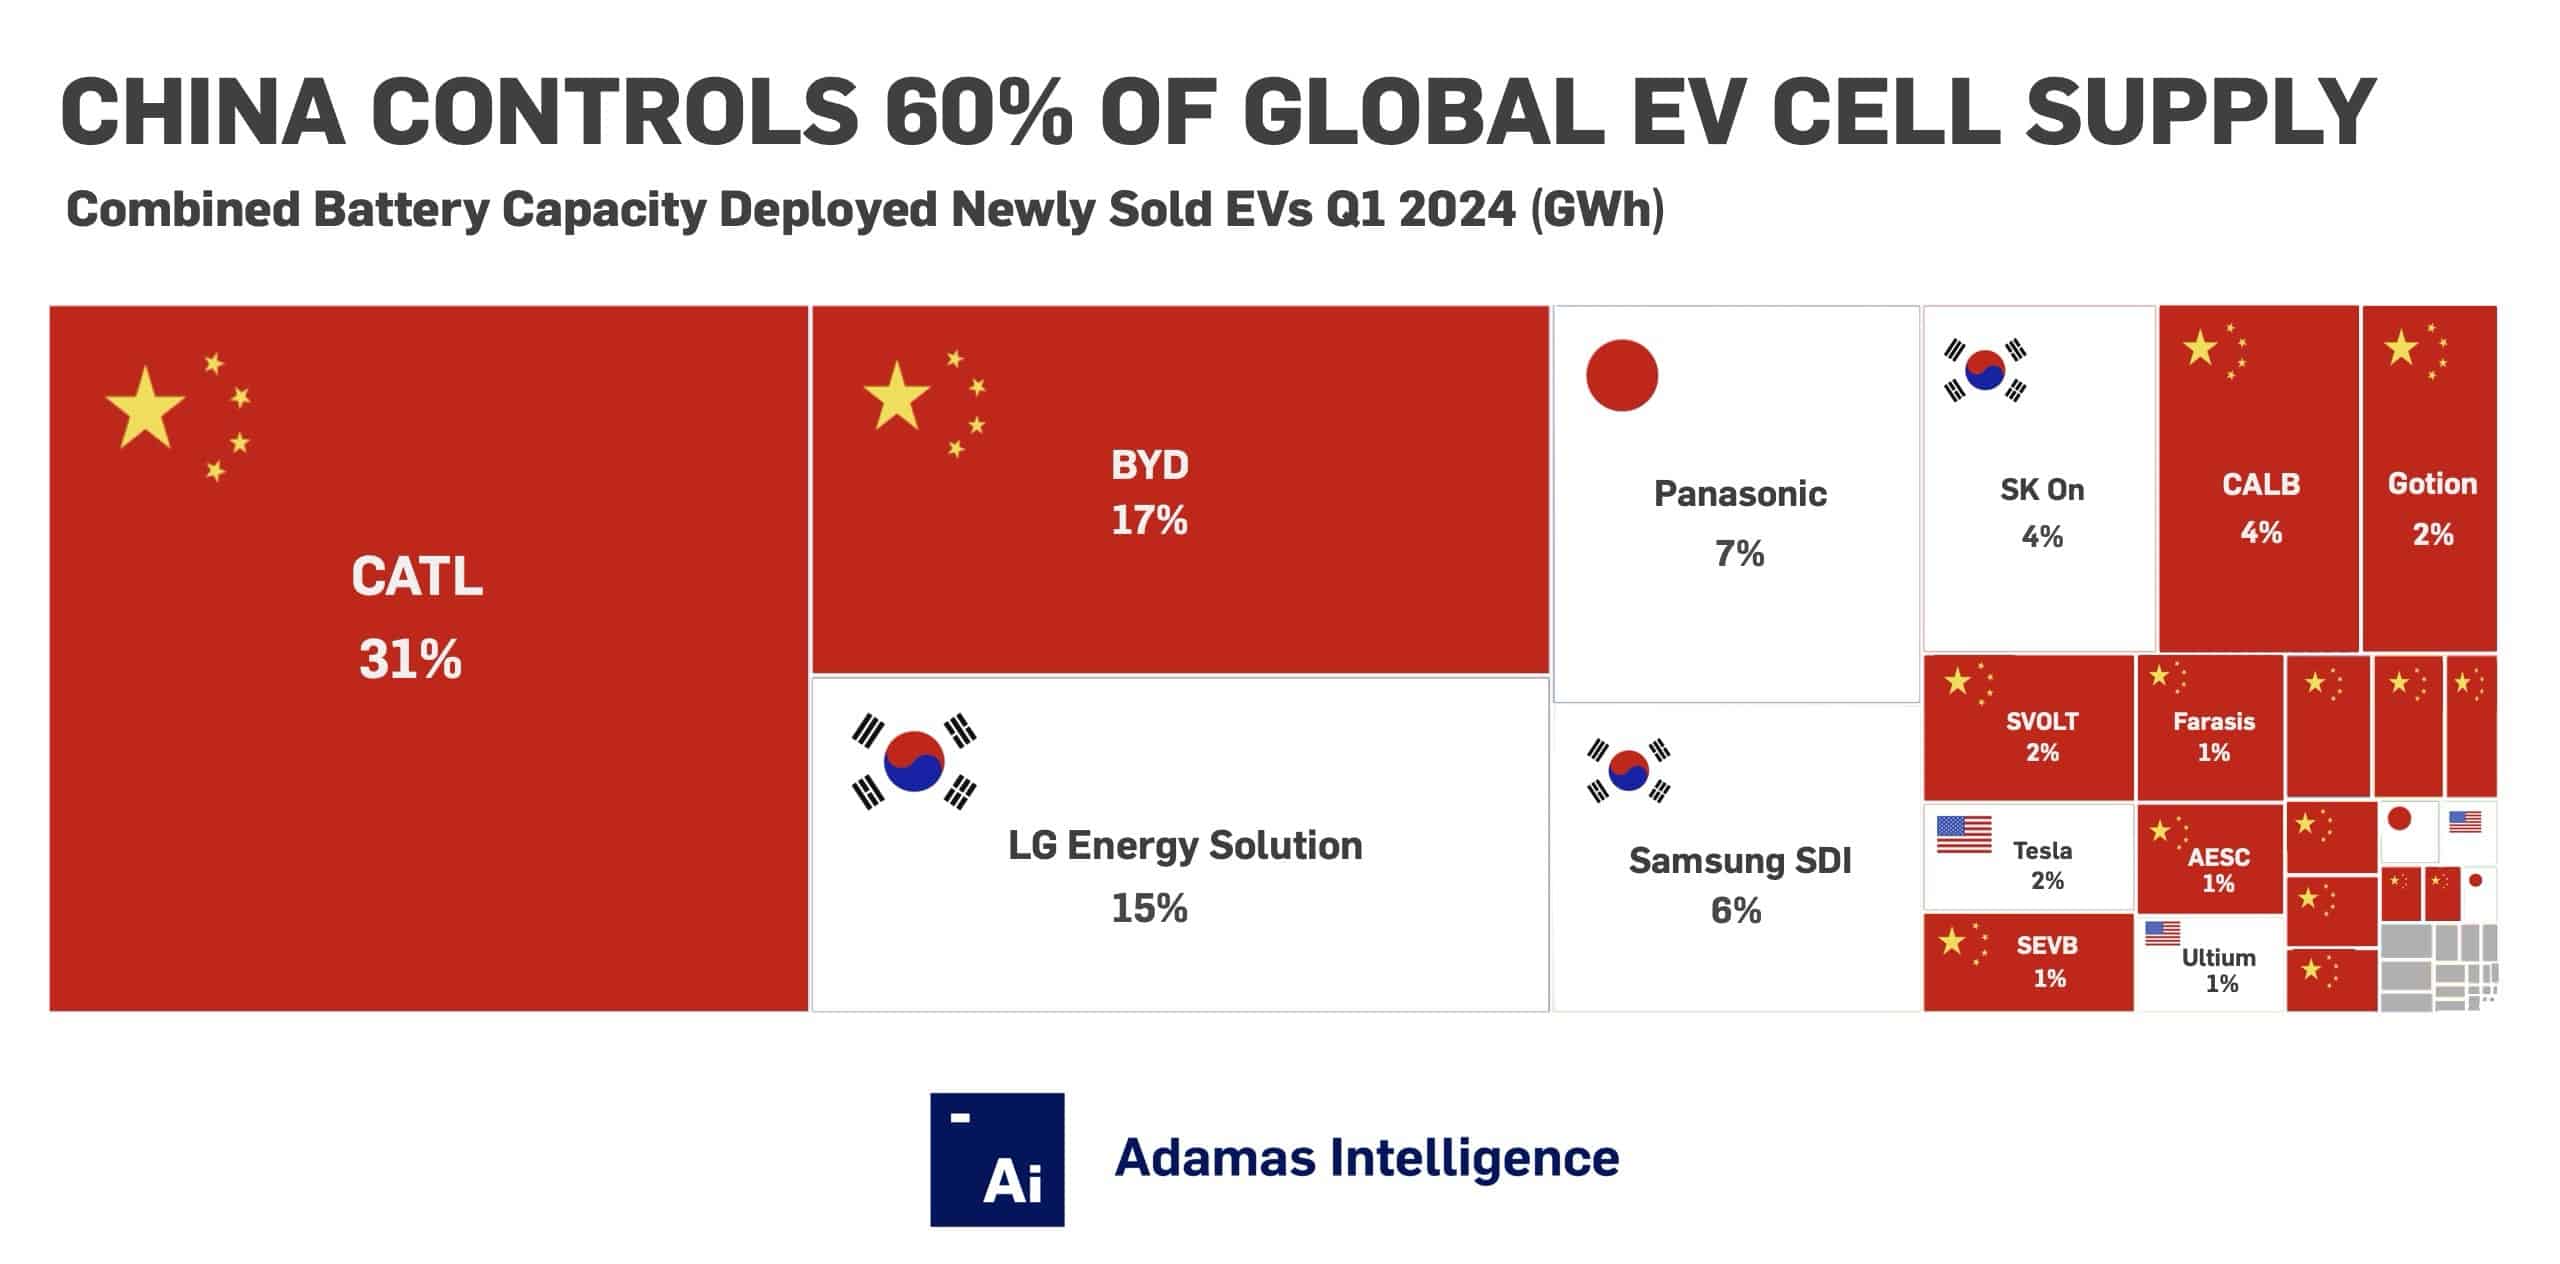 Global EV cell supply is 60% Chinese